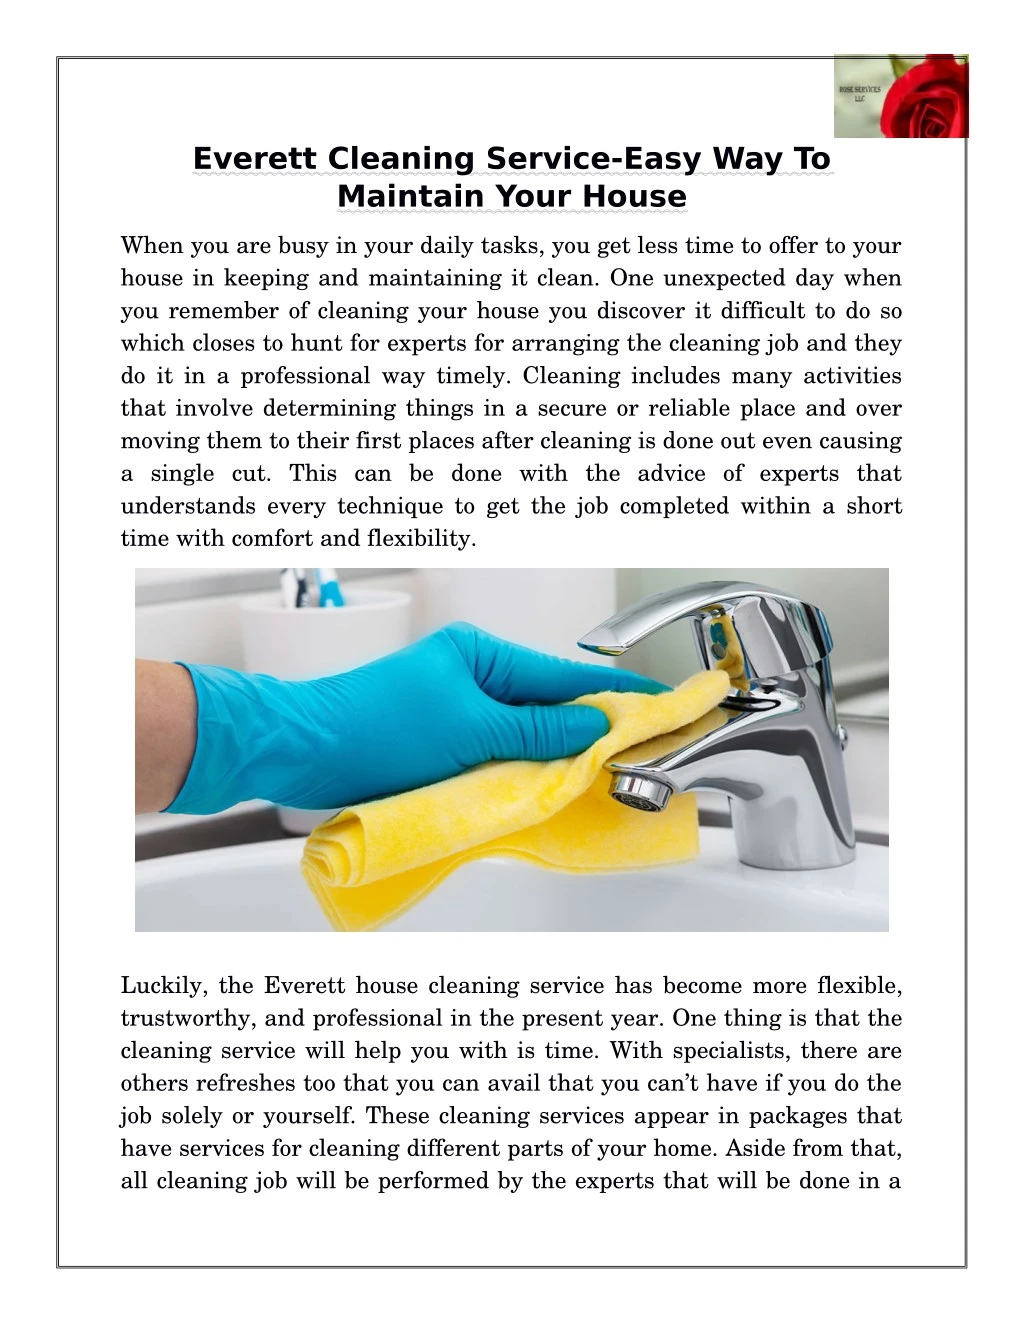 everett cleaning service easy way to maintain